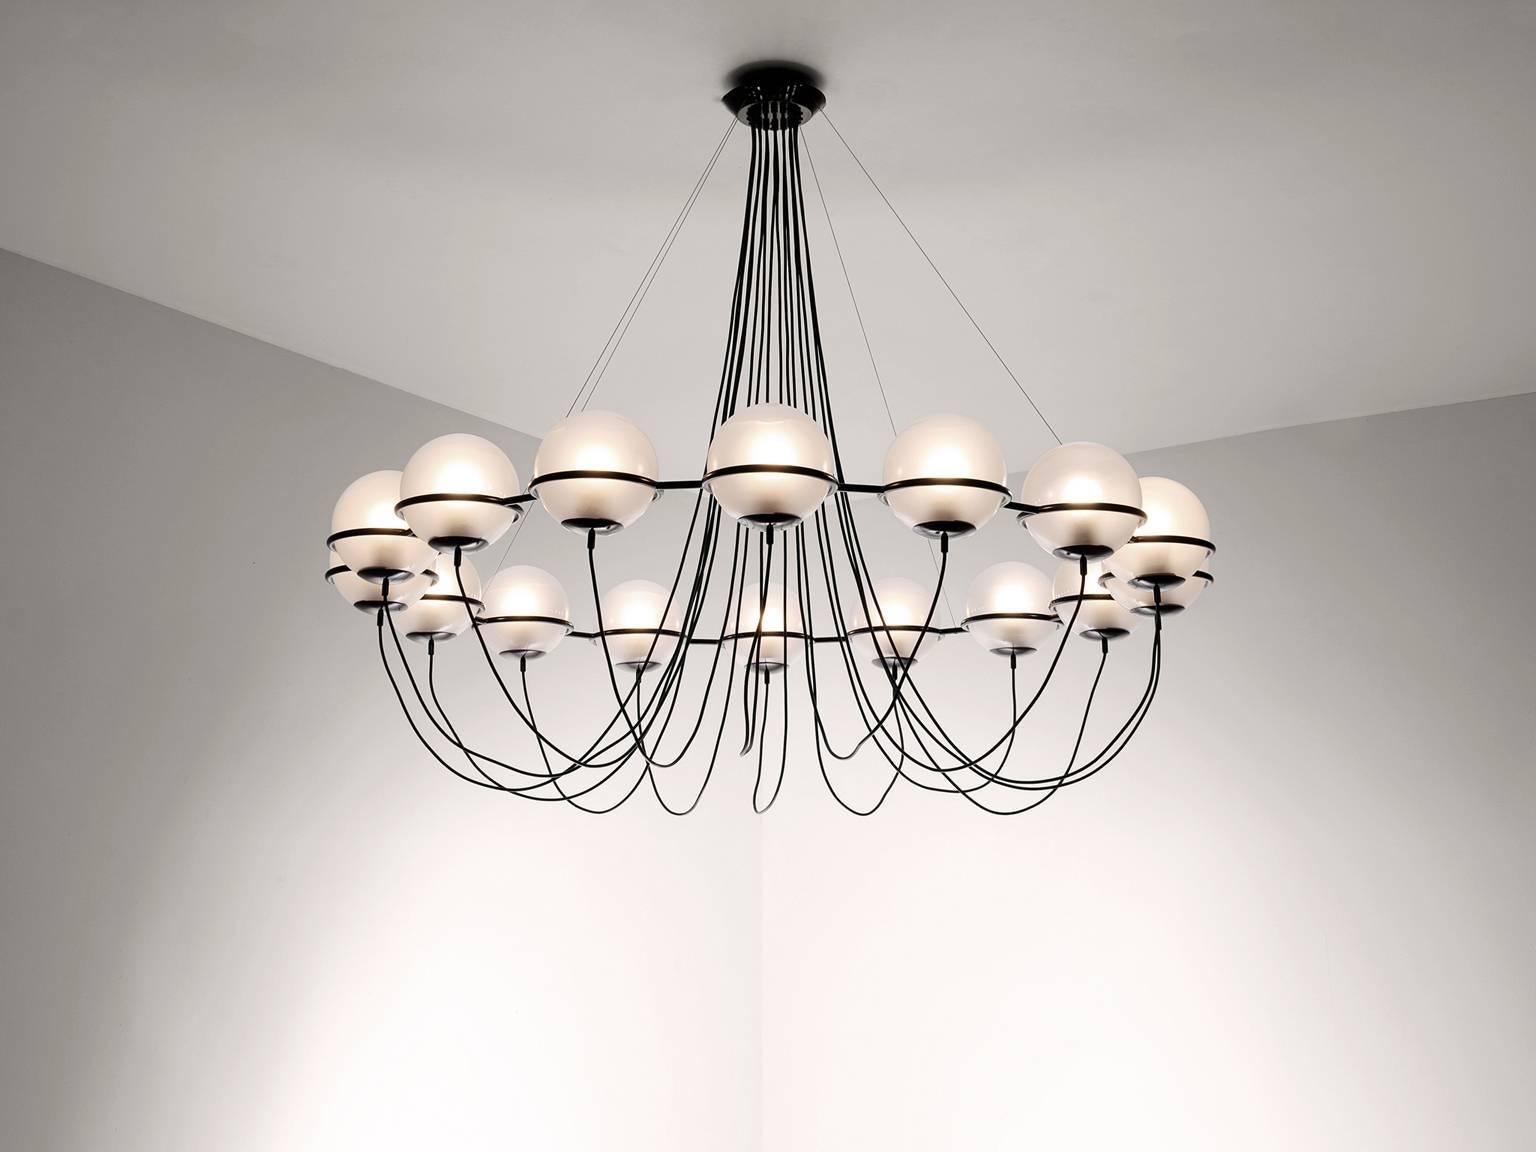 Large chandelier, in metal and glass, European 1970s.

Set of 3 chandeliers. Very large, 180 cm diameter, chandelier with 16 glass spheres. It is obvious that this design is inspired on the earlier designs of Gino Sarfatti for Arteluce, but this